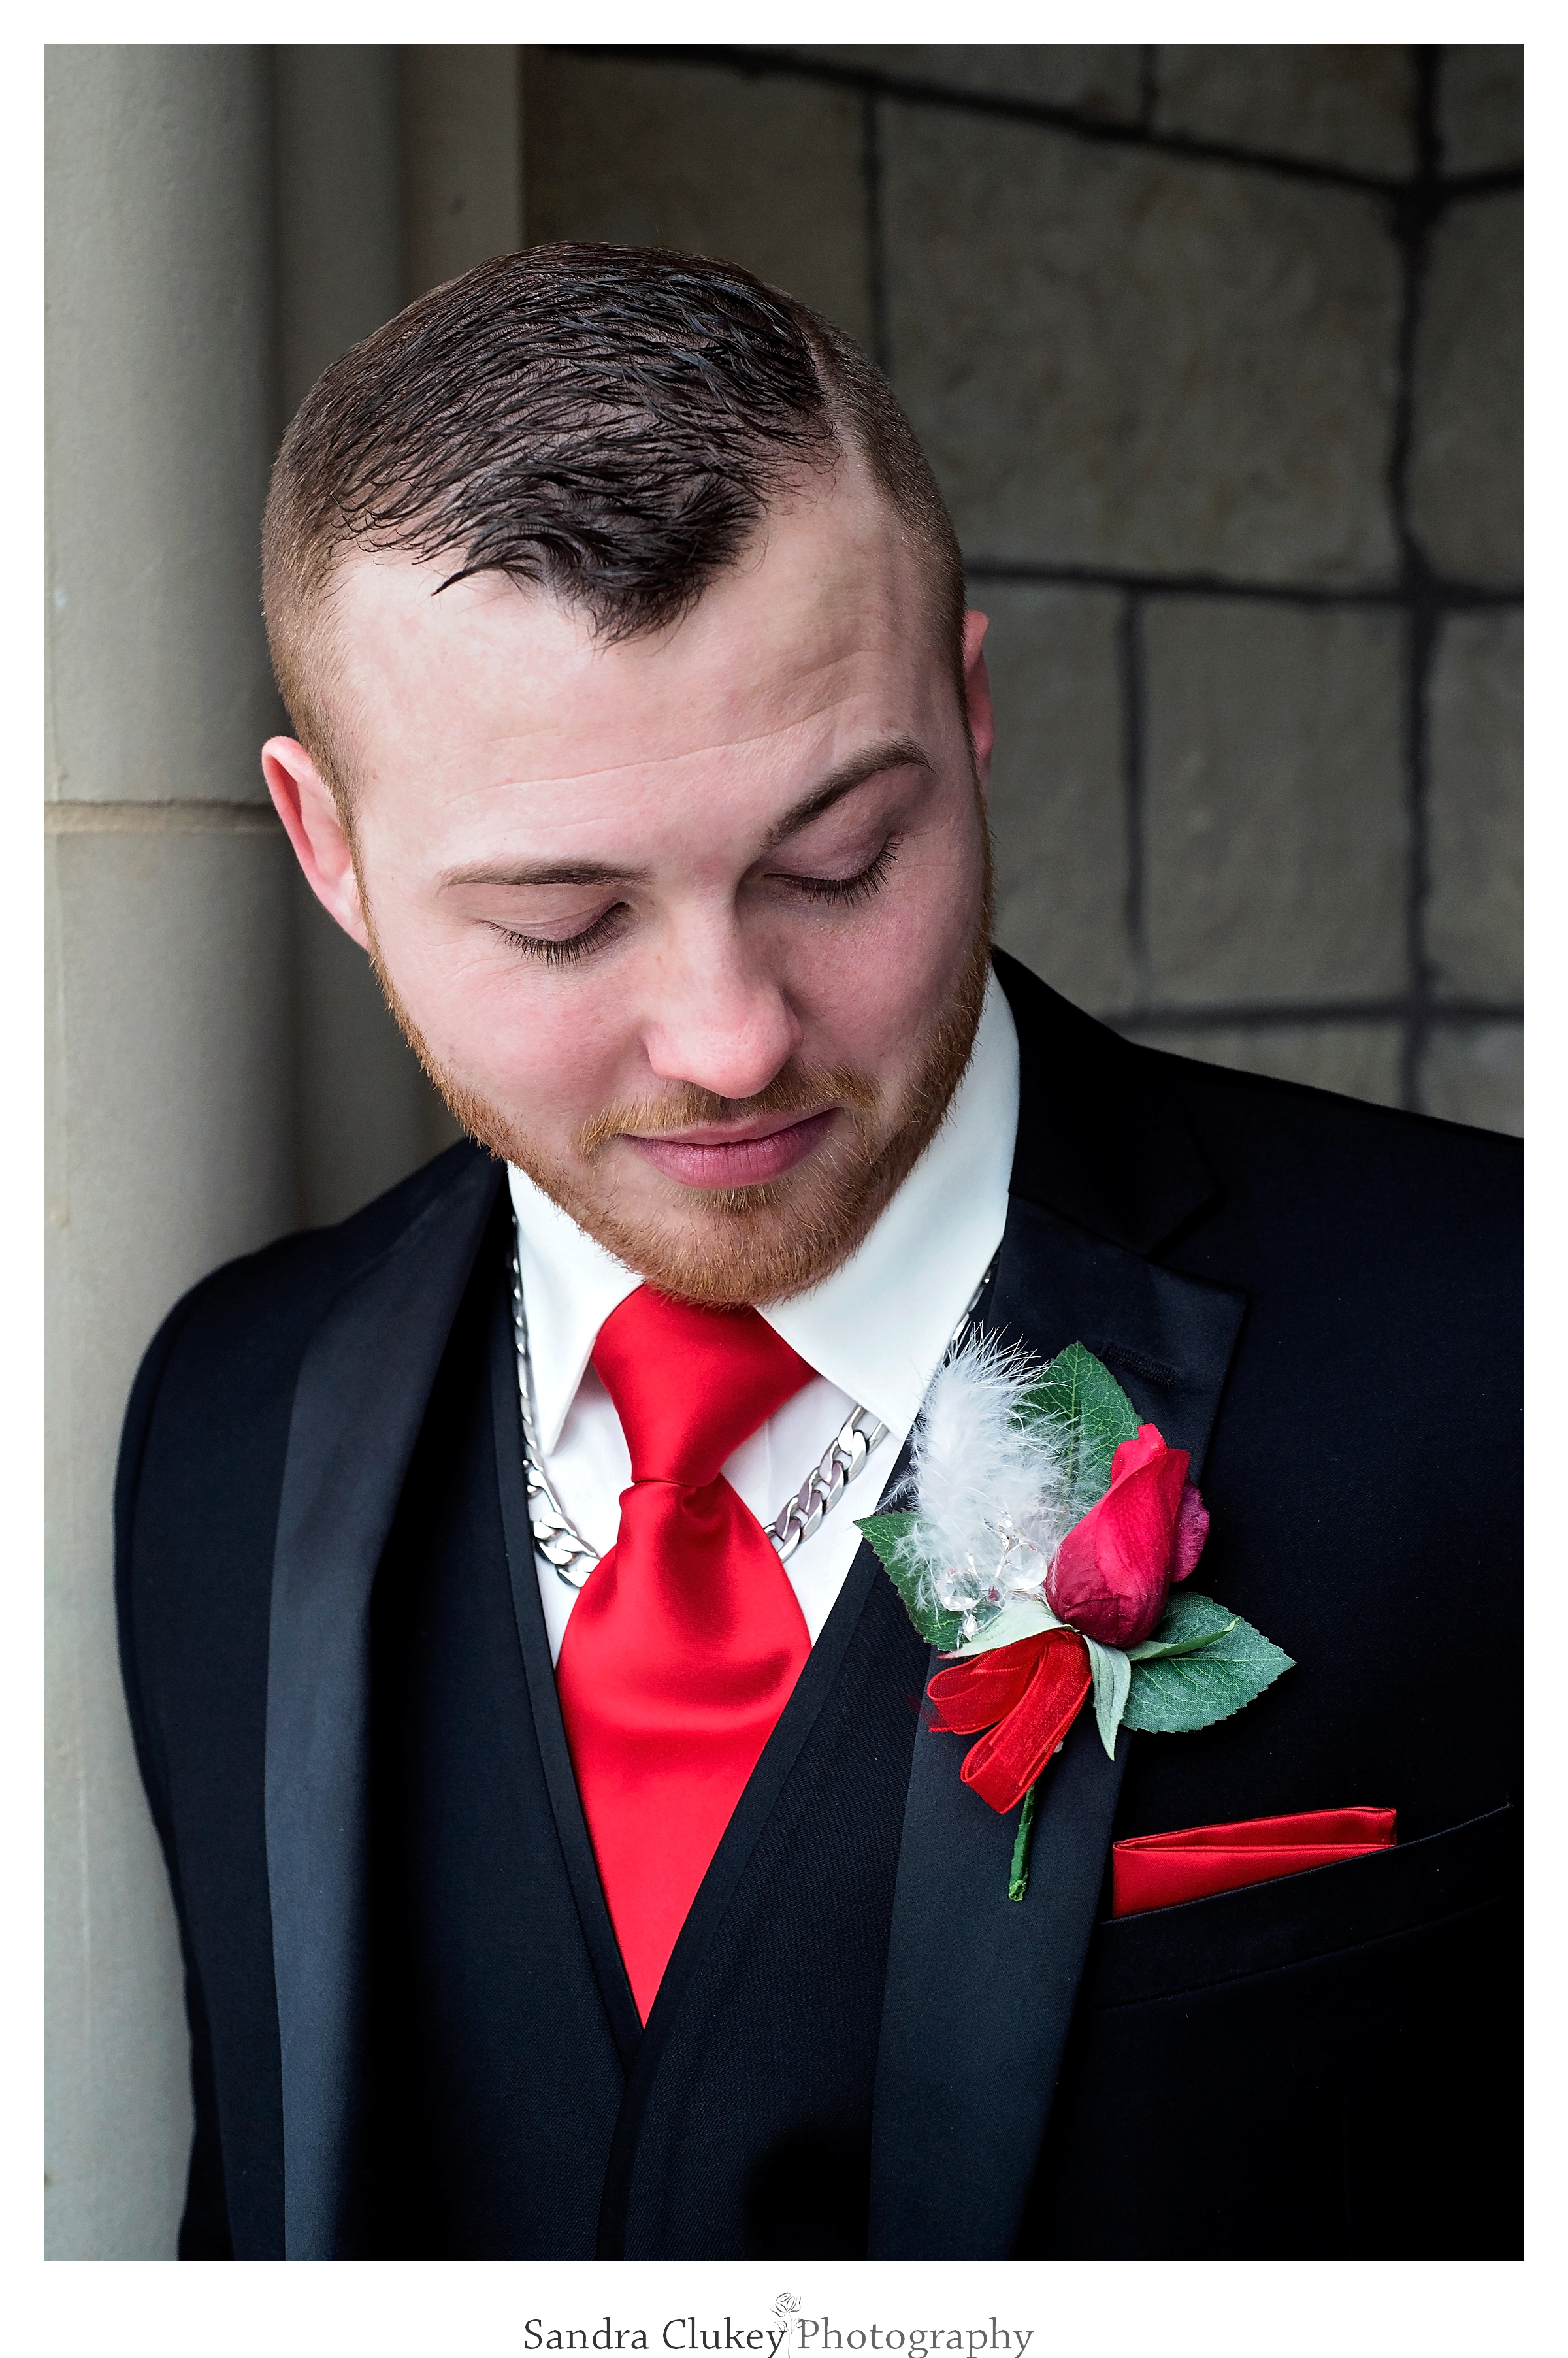 Handsome groom on wedding day at  Lee University chapel, Cleveland TN.